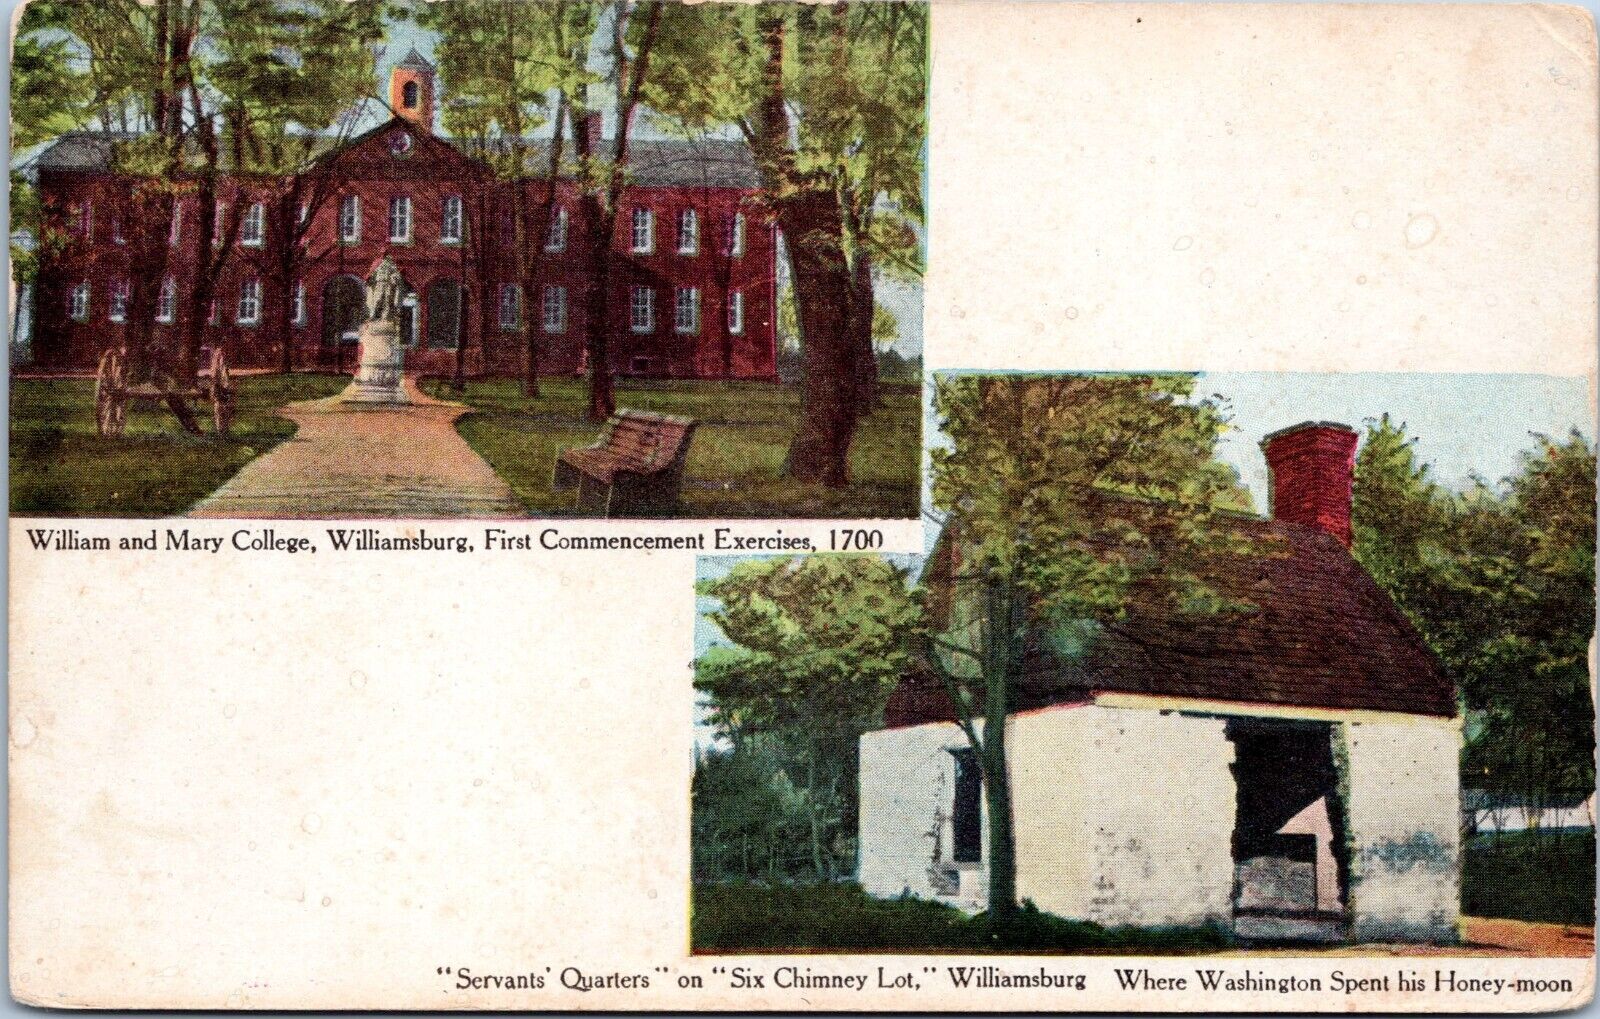 Private Mailing Card - Williamsburg Virginia - Six Chimney Lot, William and Mary